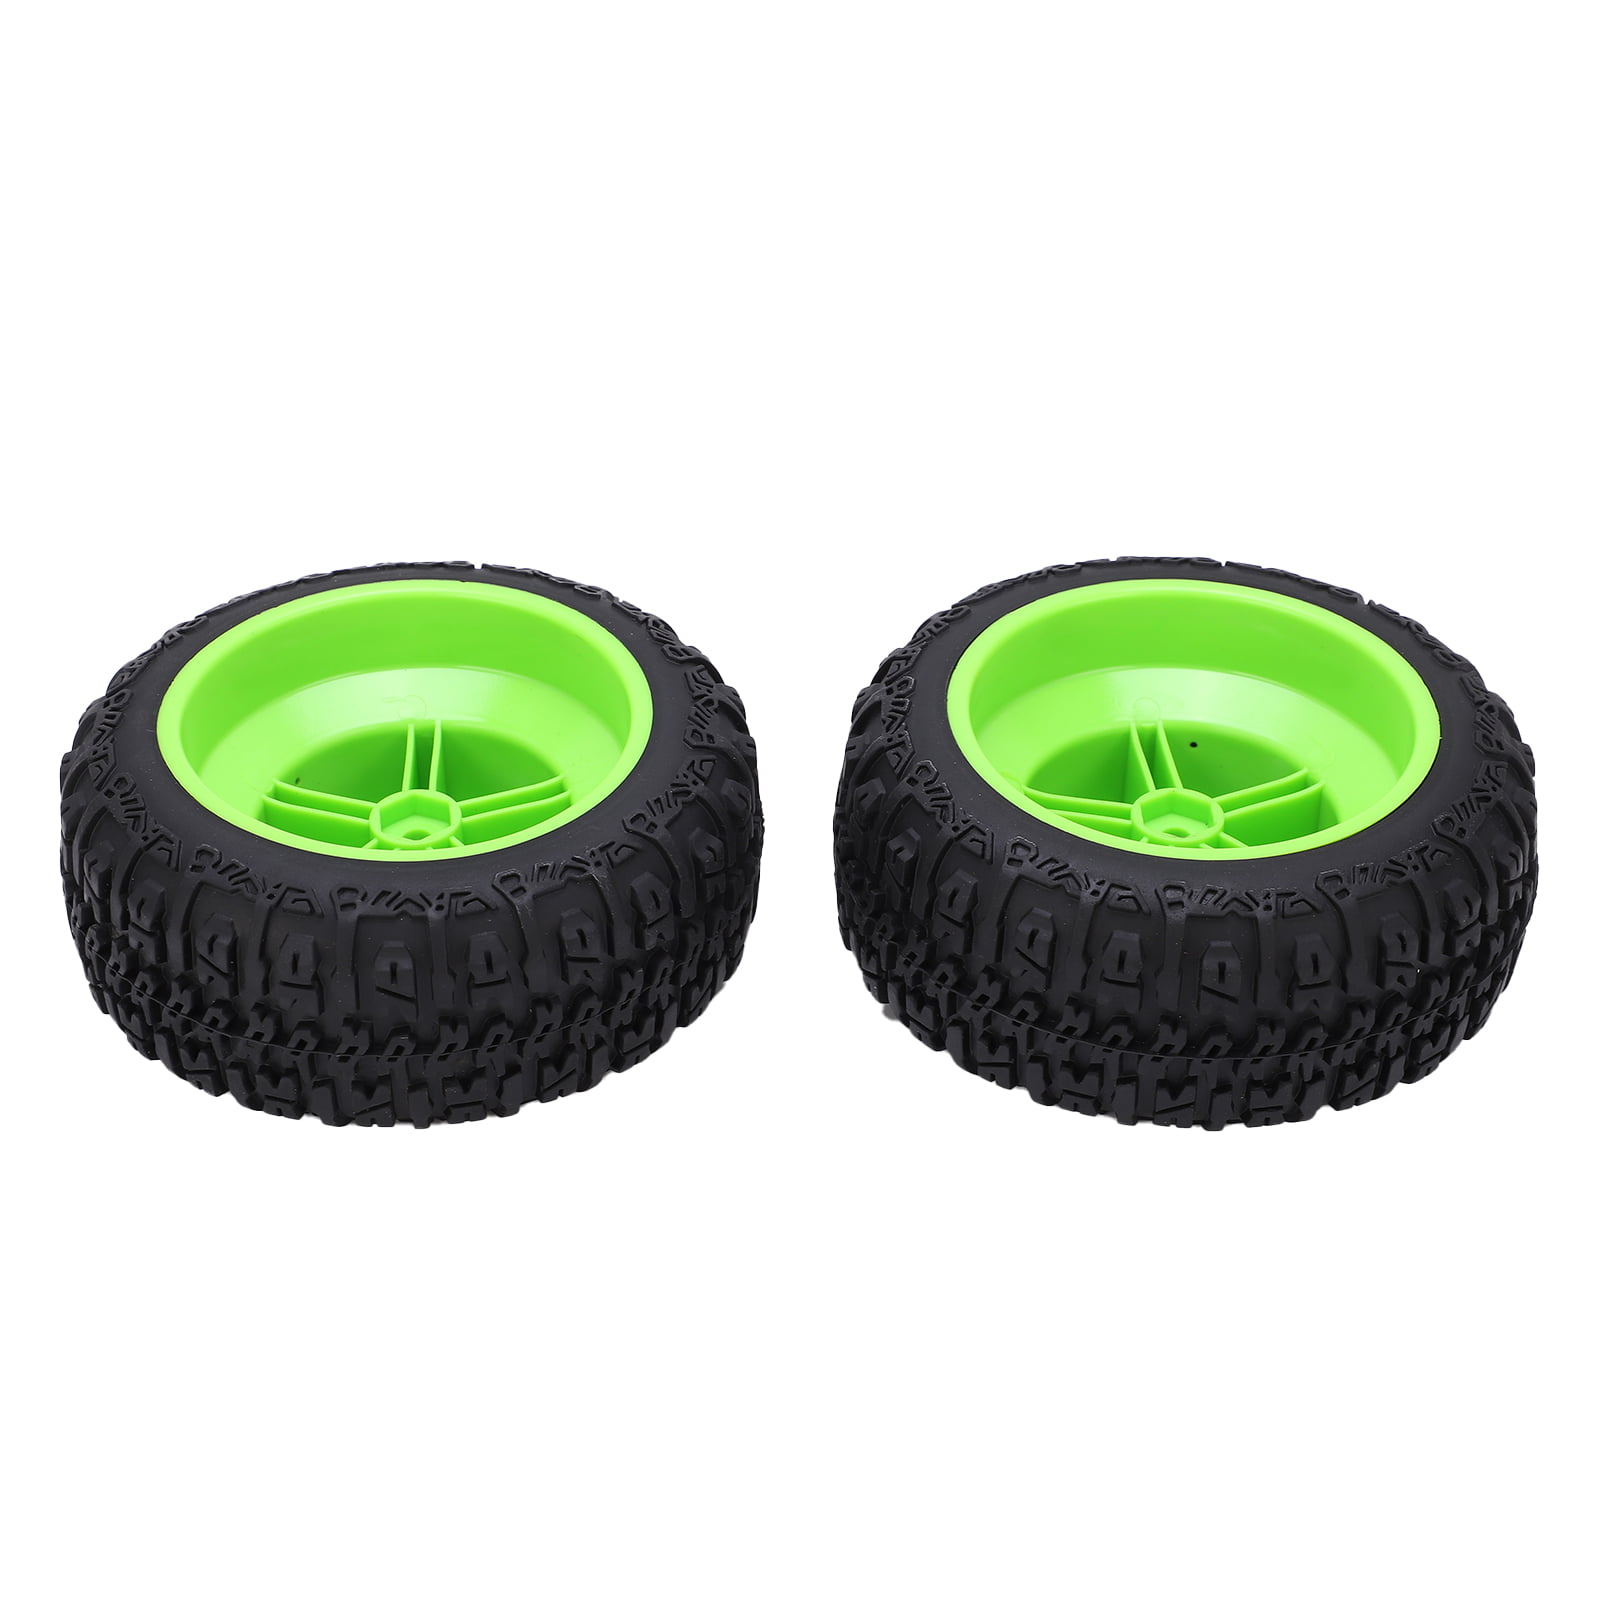 ACOUTO 2pcs Wheel Rim And Tires Set For Slash 1/10 RC Short Course Truck Tires Upgrade Parts Green,RC Wheel Rim And Tires Set,RC Short Course Truck Tires